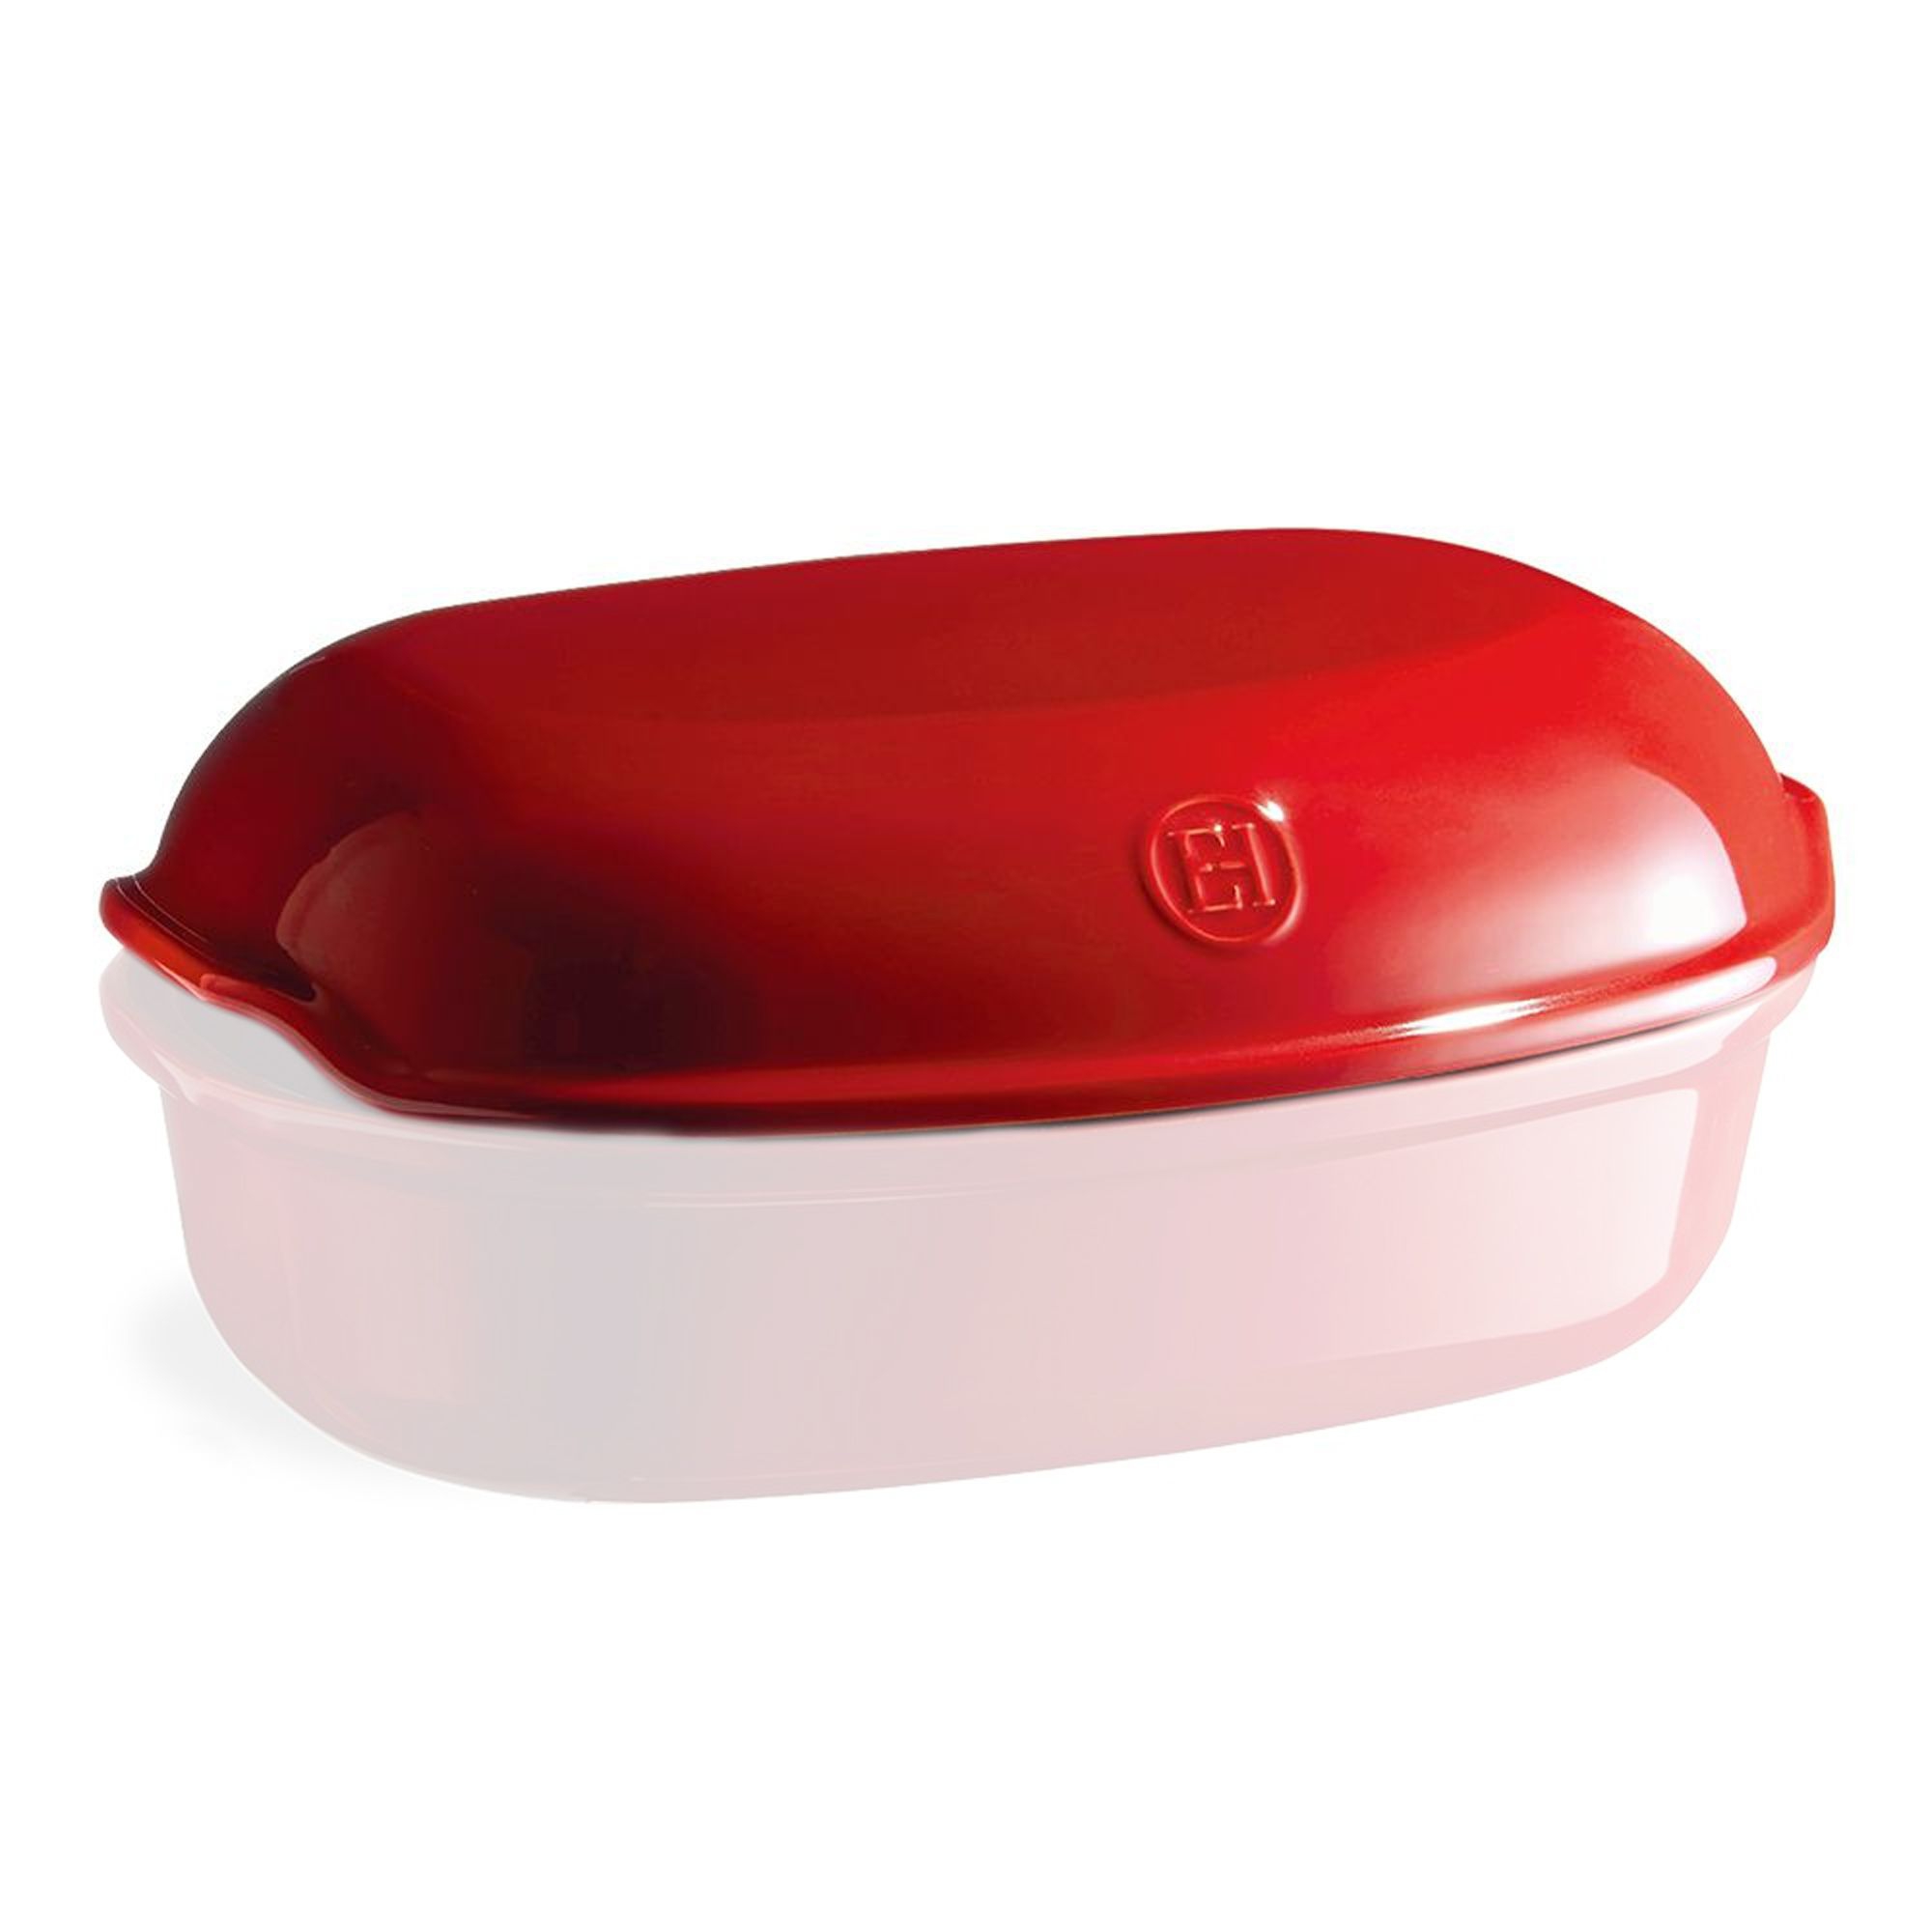 Emile Henry - Lid for Artisan Bread Baker - Replacement Grand Cru